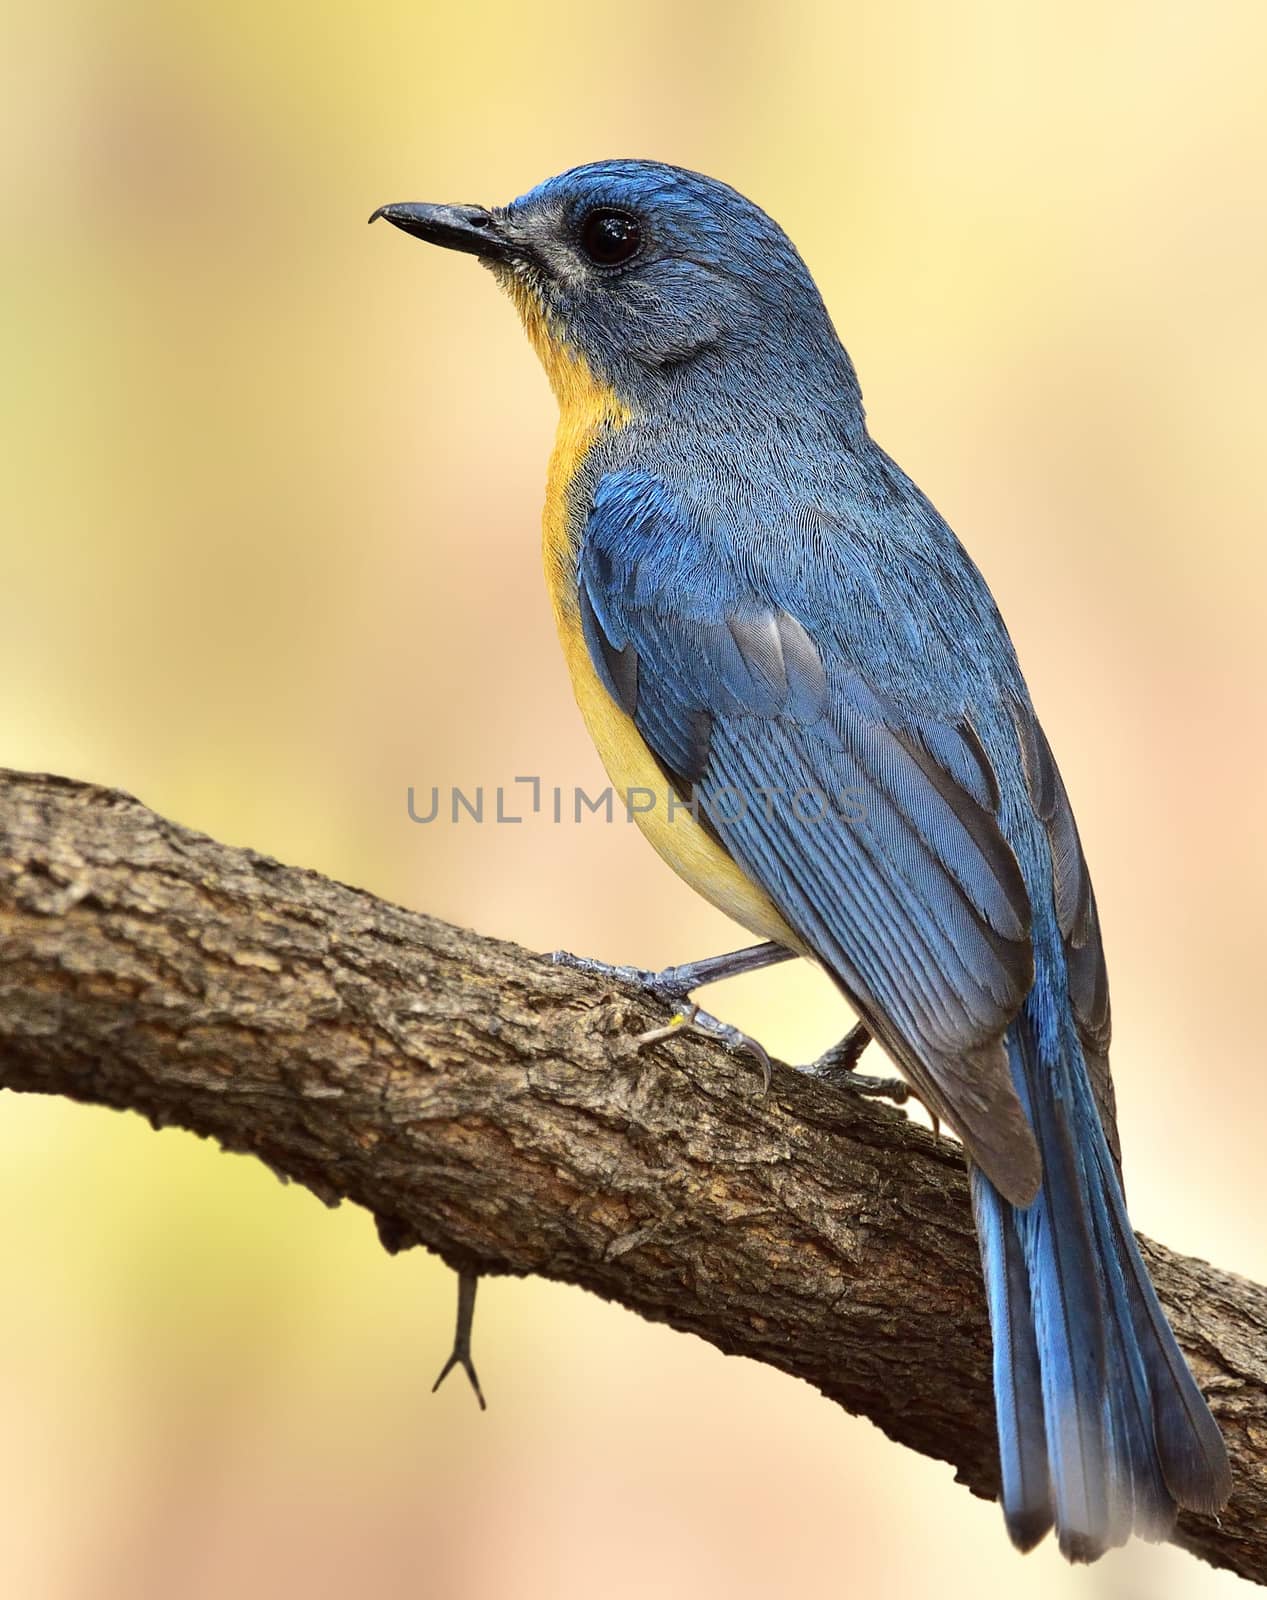 Tickell's blue flycatcher is a small passerine bird in the flycatcher family. This is an insectivorous species which breeds in tropical Asia, from the Indian Subcontinent.